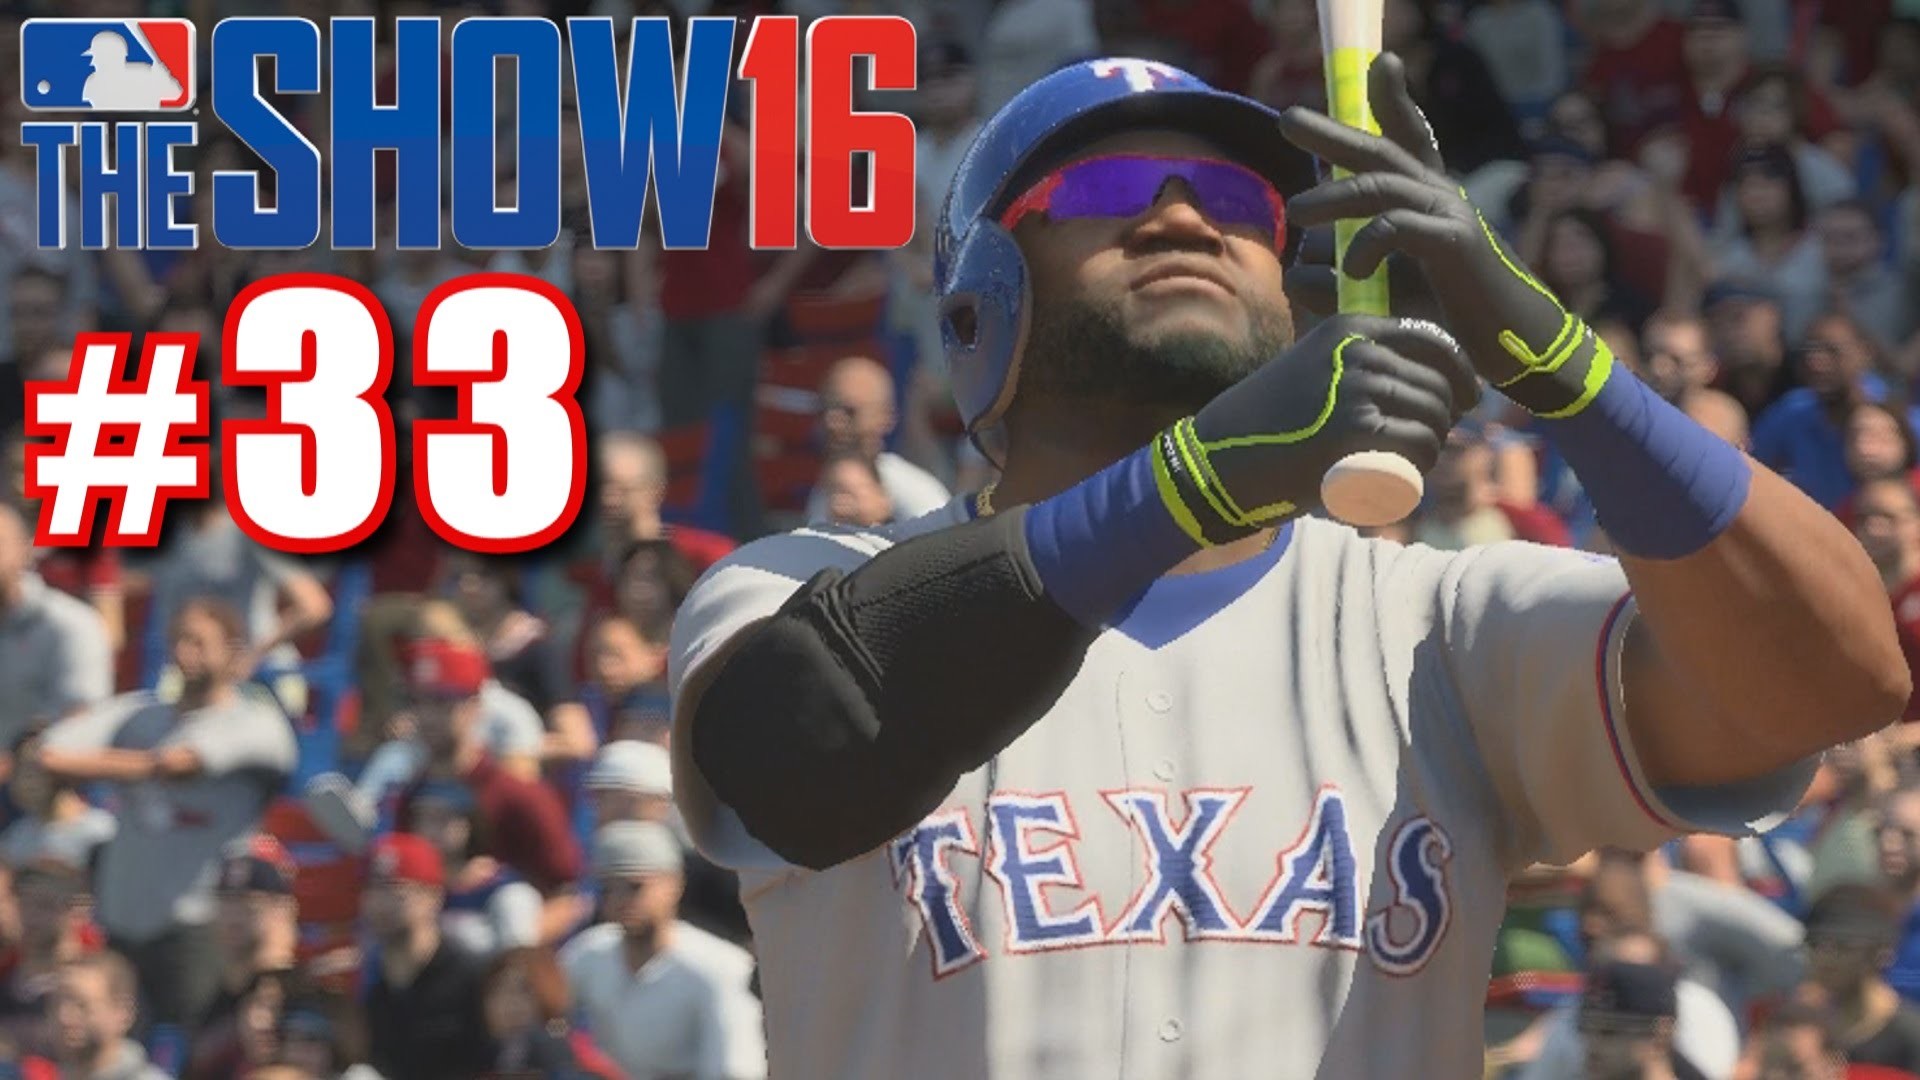 1920x1080 DAVID ORTIZ ON THE RANGERS! | MLB The Show 16 | Road to the Show #33 -  YouTube